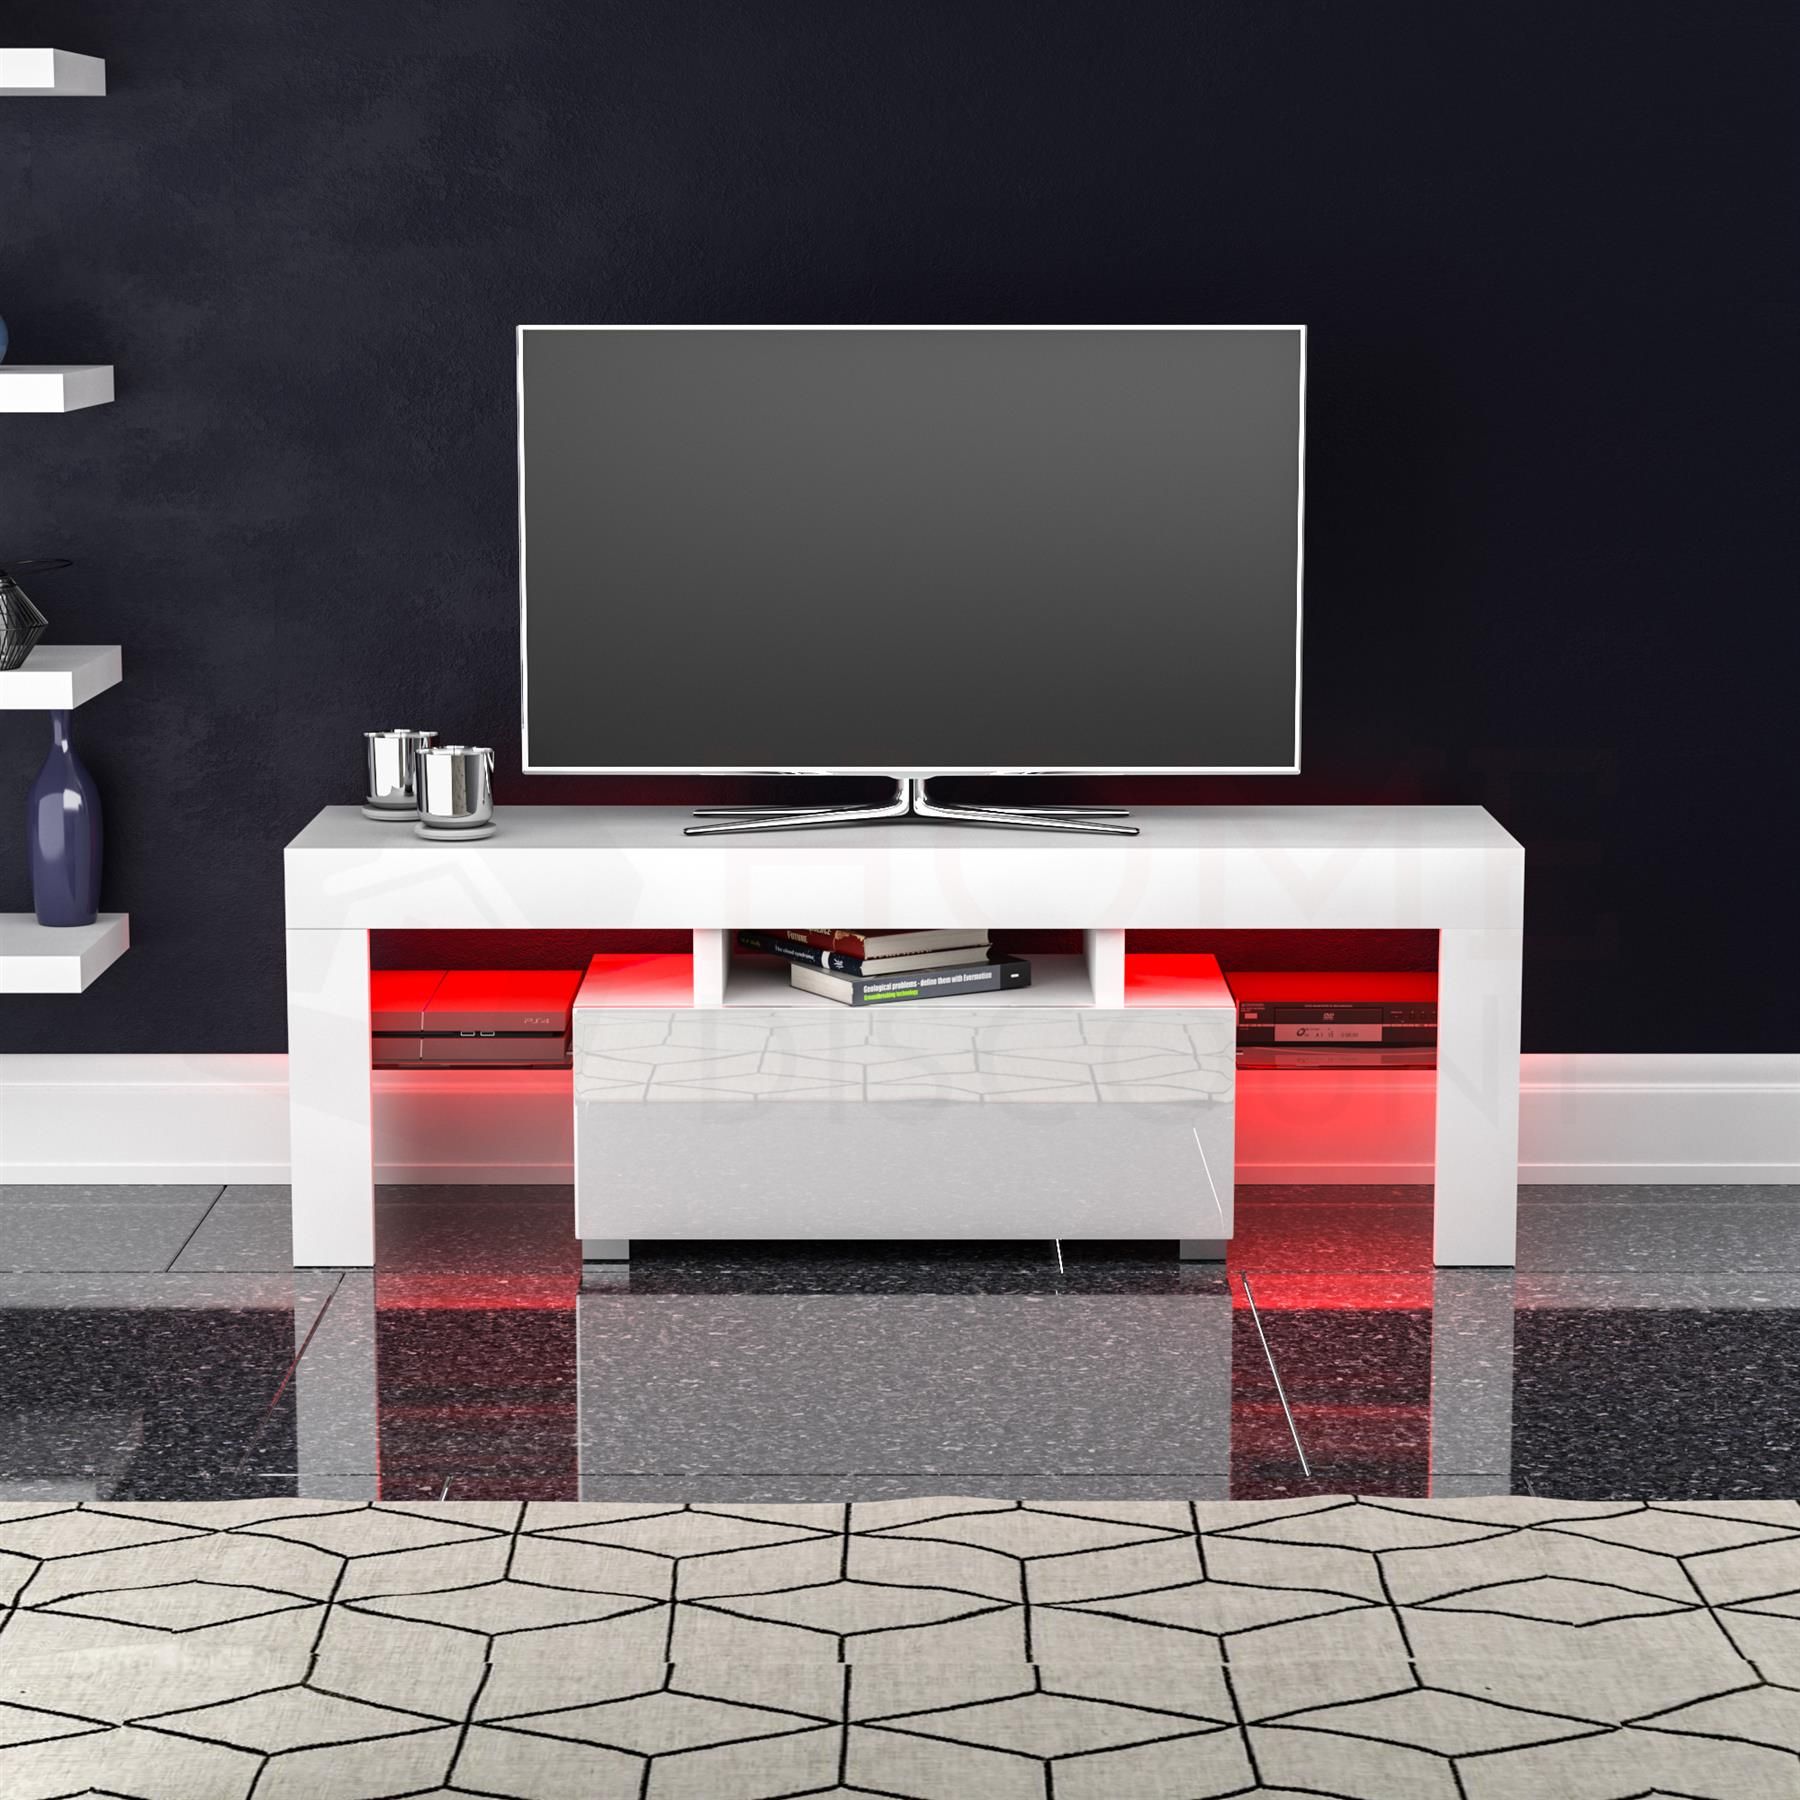 Luna Led Tv Stand Cabinet Unit 1 Drawer Modern Within Zimtown Modern Tv Stands High Gloss Media Console Cabinet With Led Shelf And Drawers (View 10 of 15)